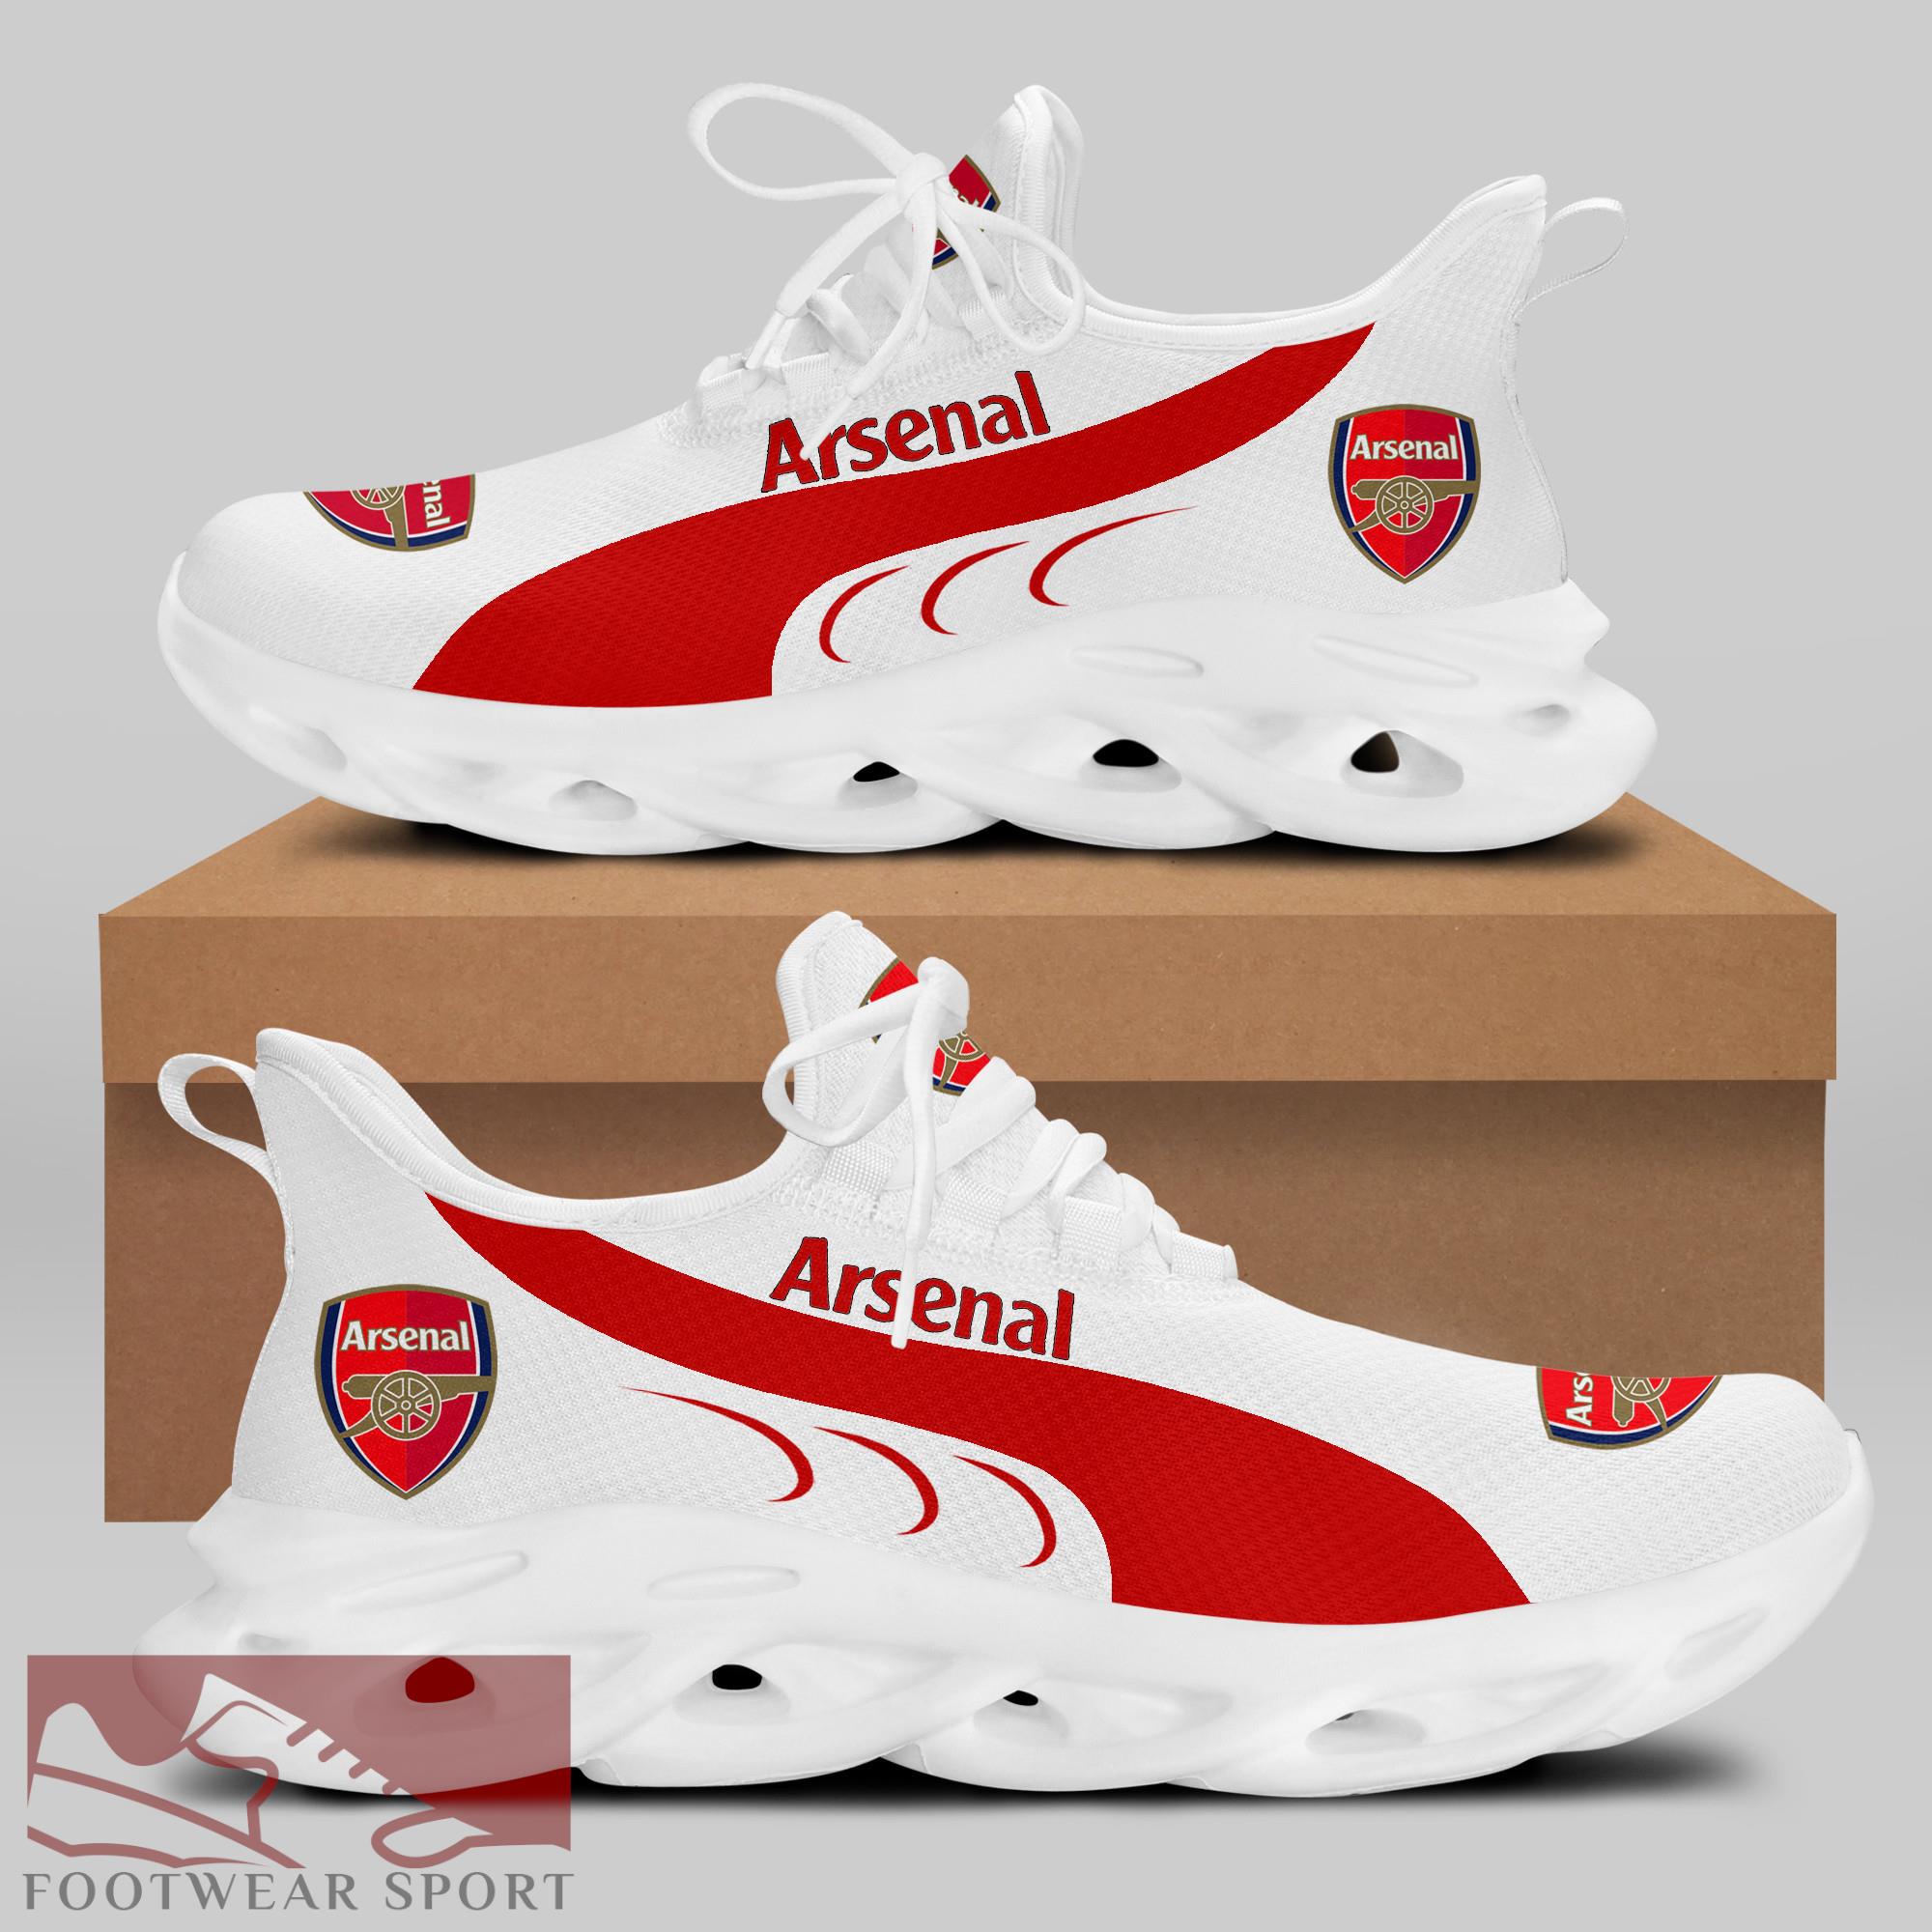 Arsenal Fans EPL Chunky Sneakers Fashion-forward Max Soul Shoes For Men And Women - Arsenal Chunky Sneakers White Black Max Soul Shoes For Men And Women Photo 1